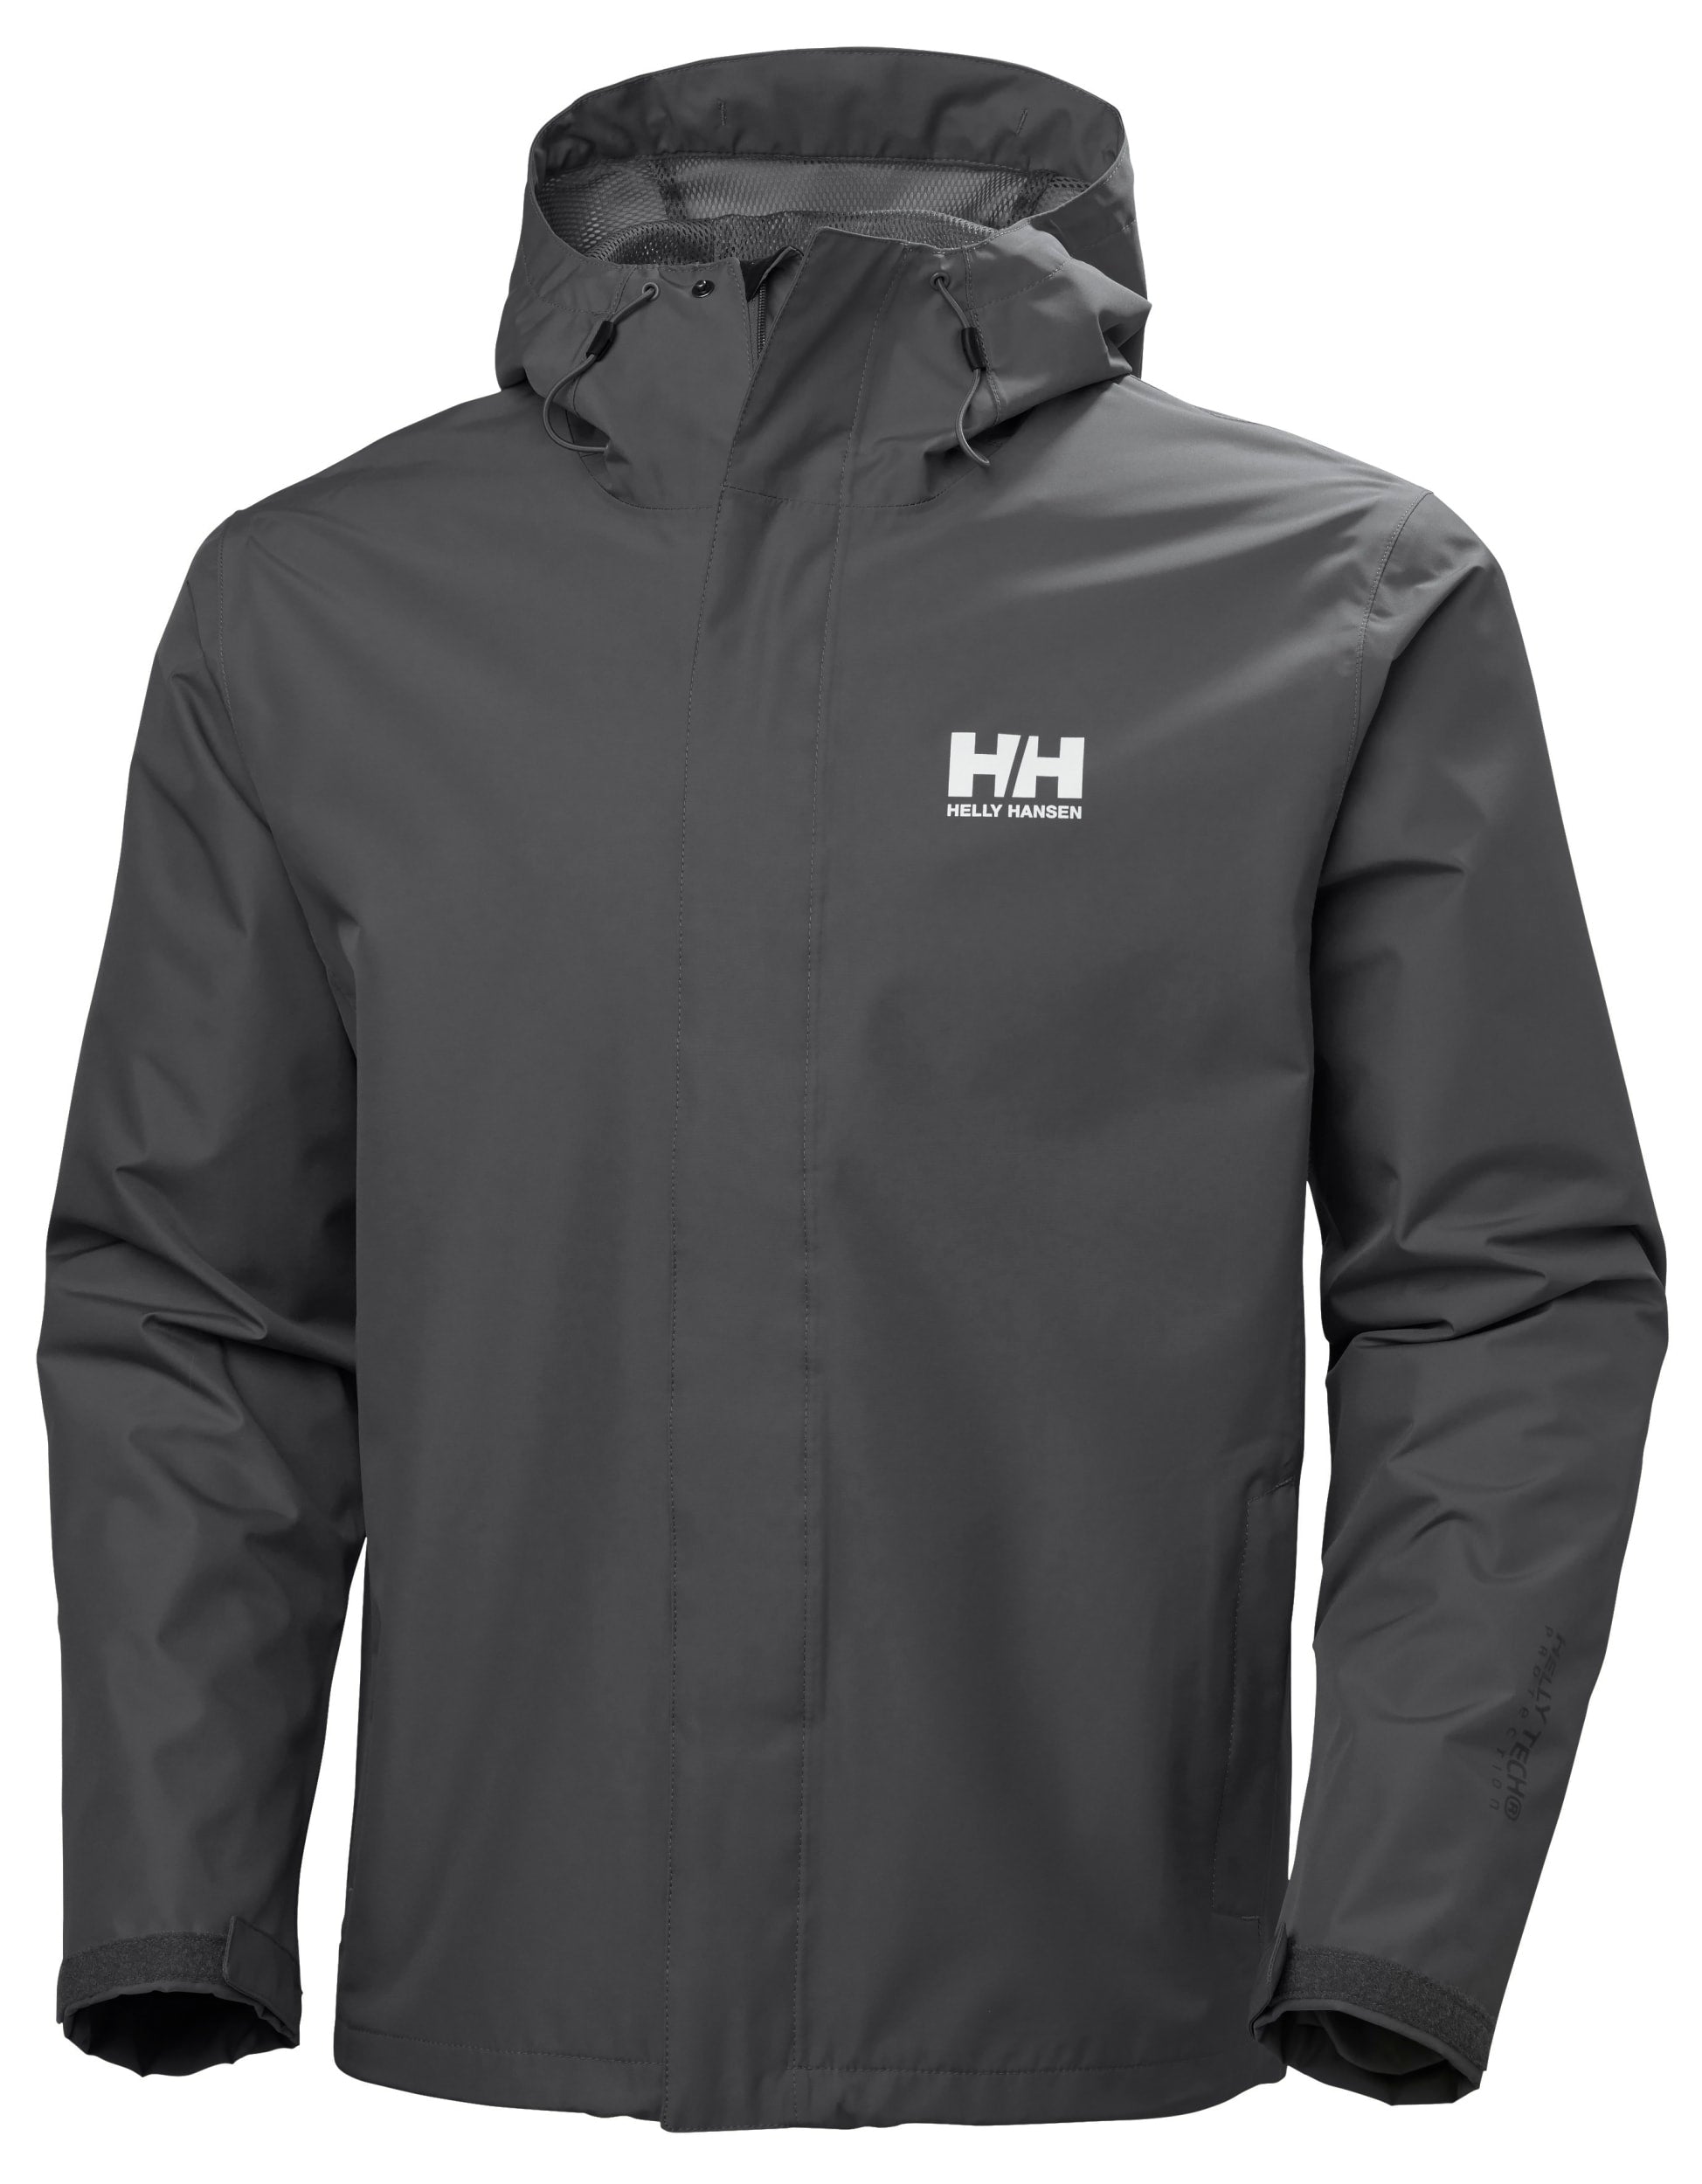 Helly Hansen Men's Seven J Rain Jacket in Charcoal from the front